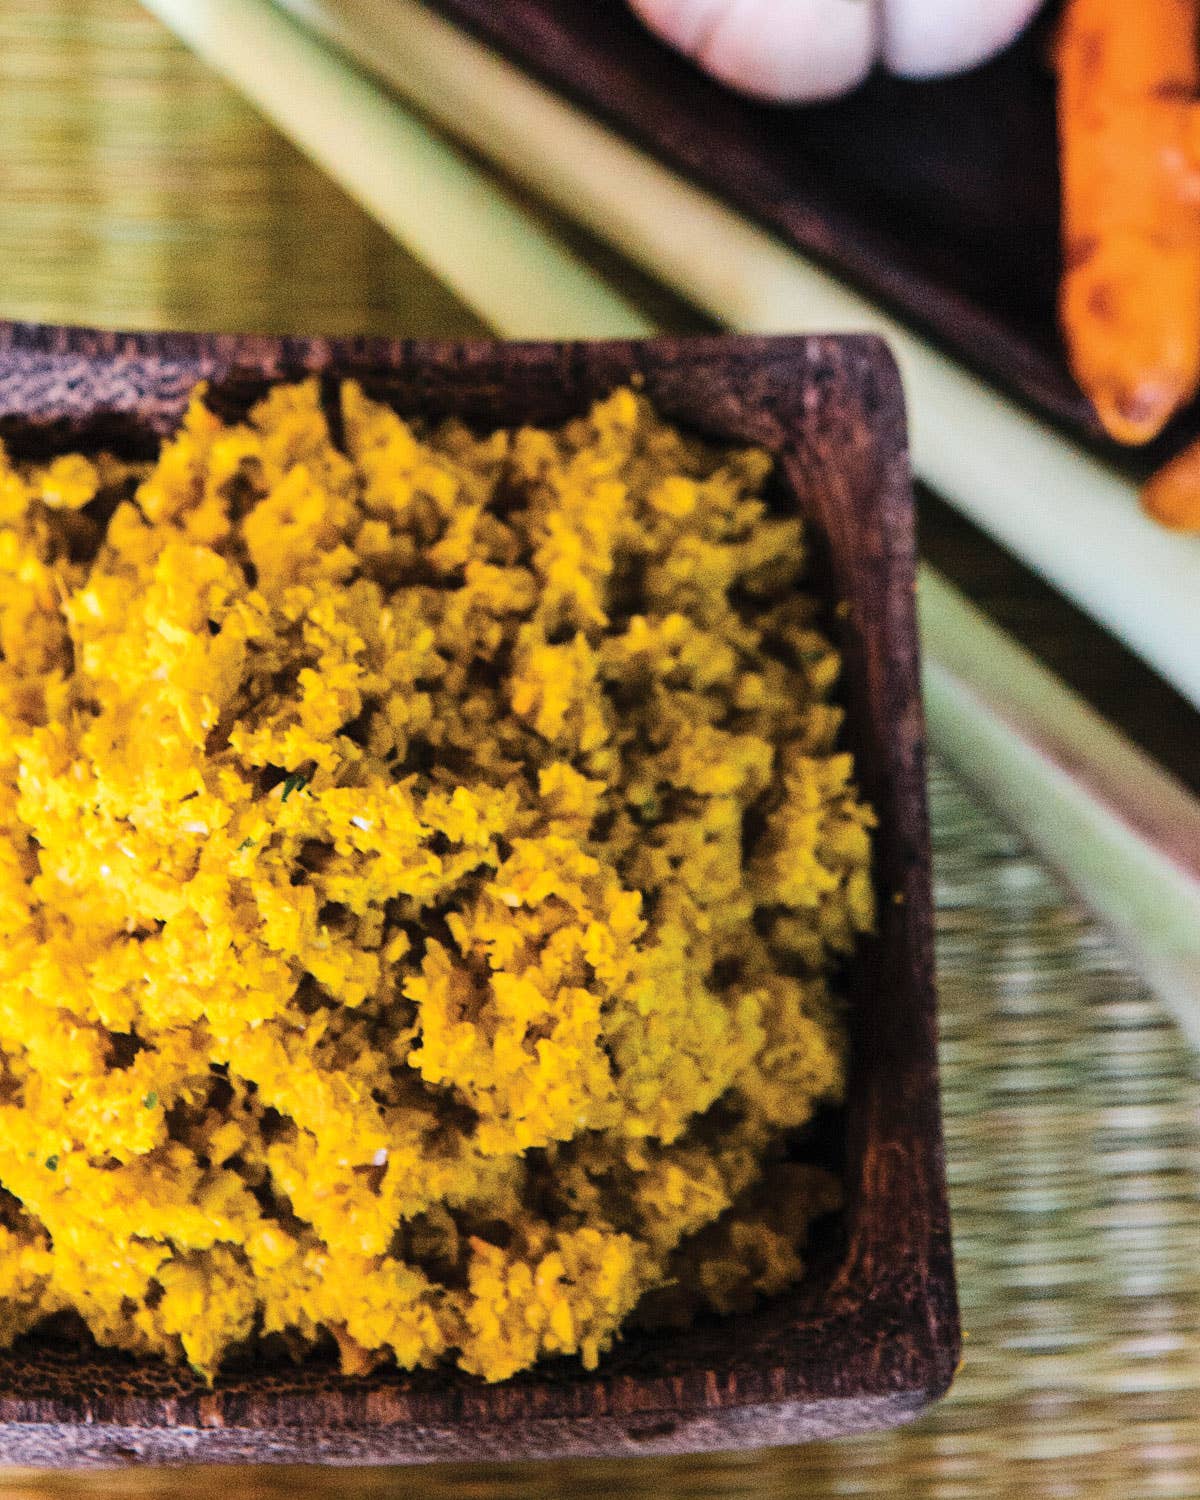 Khmer Yellow Curry Paste (Kroeung)